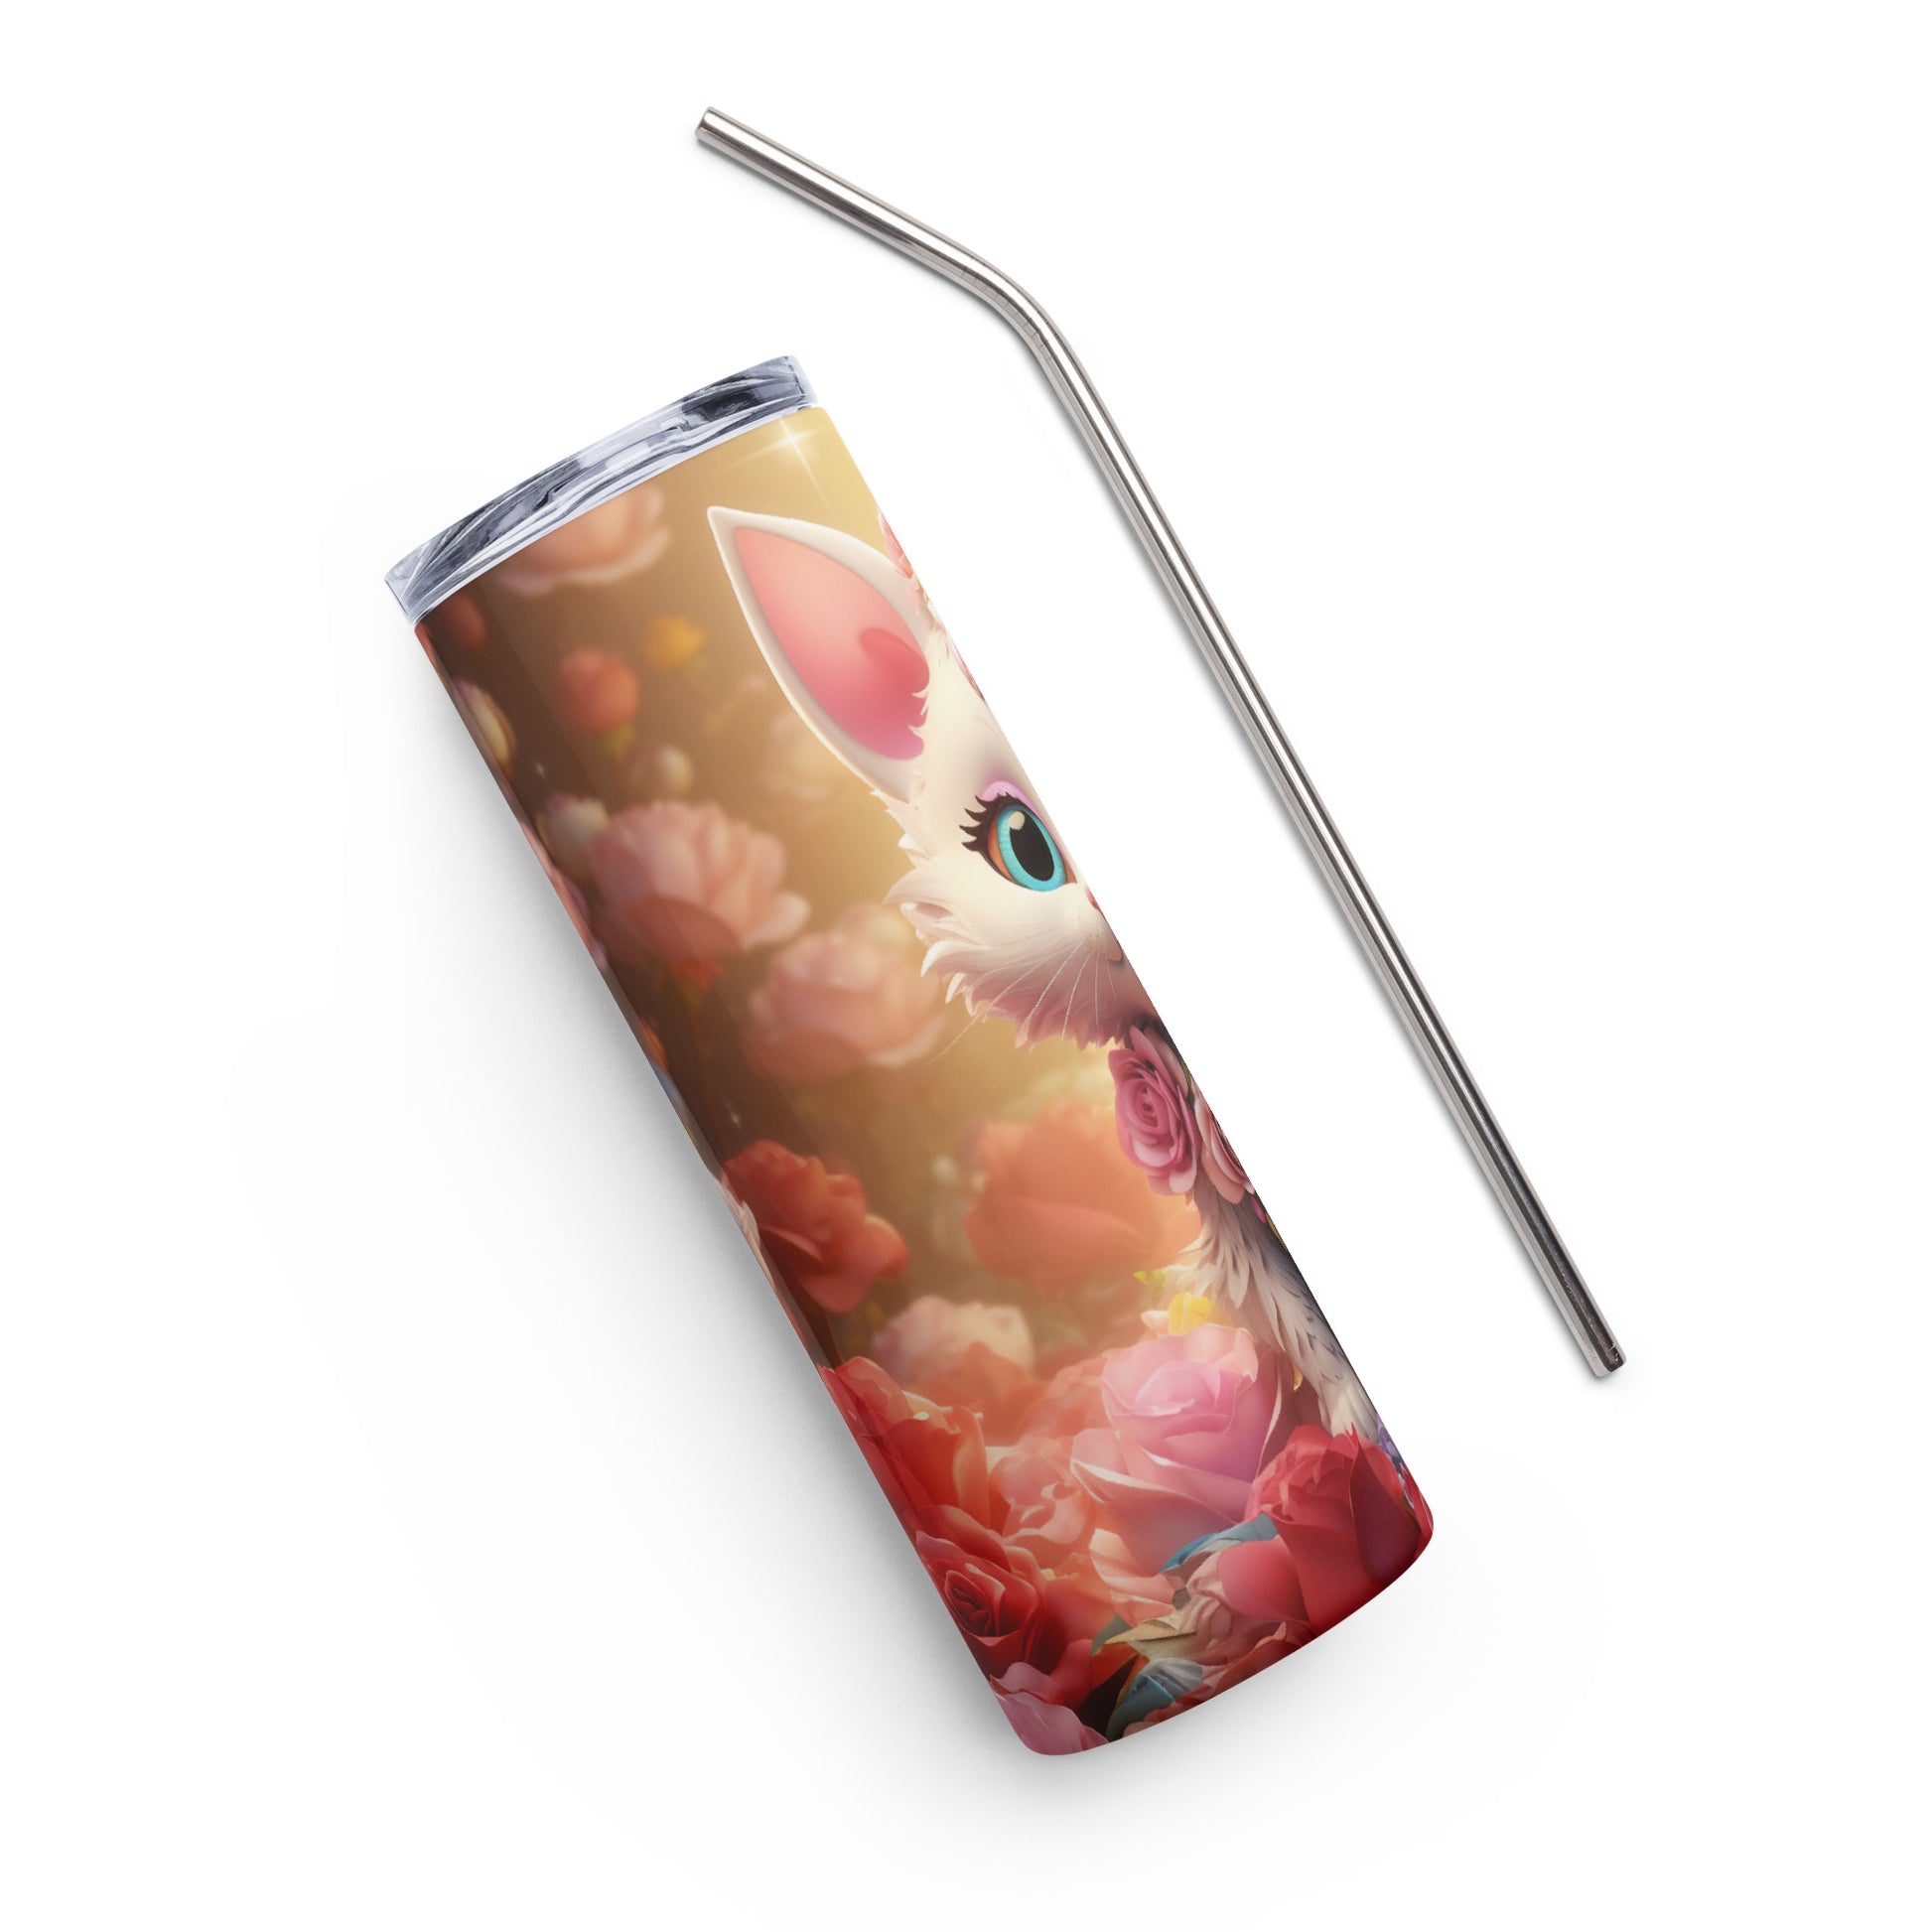 Pink Kitty in Roses Stainless steel tumbler CedarHill Country Market